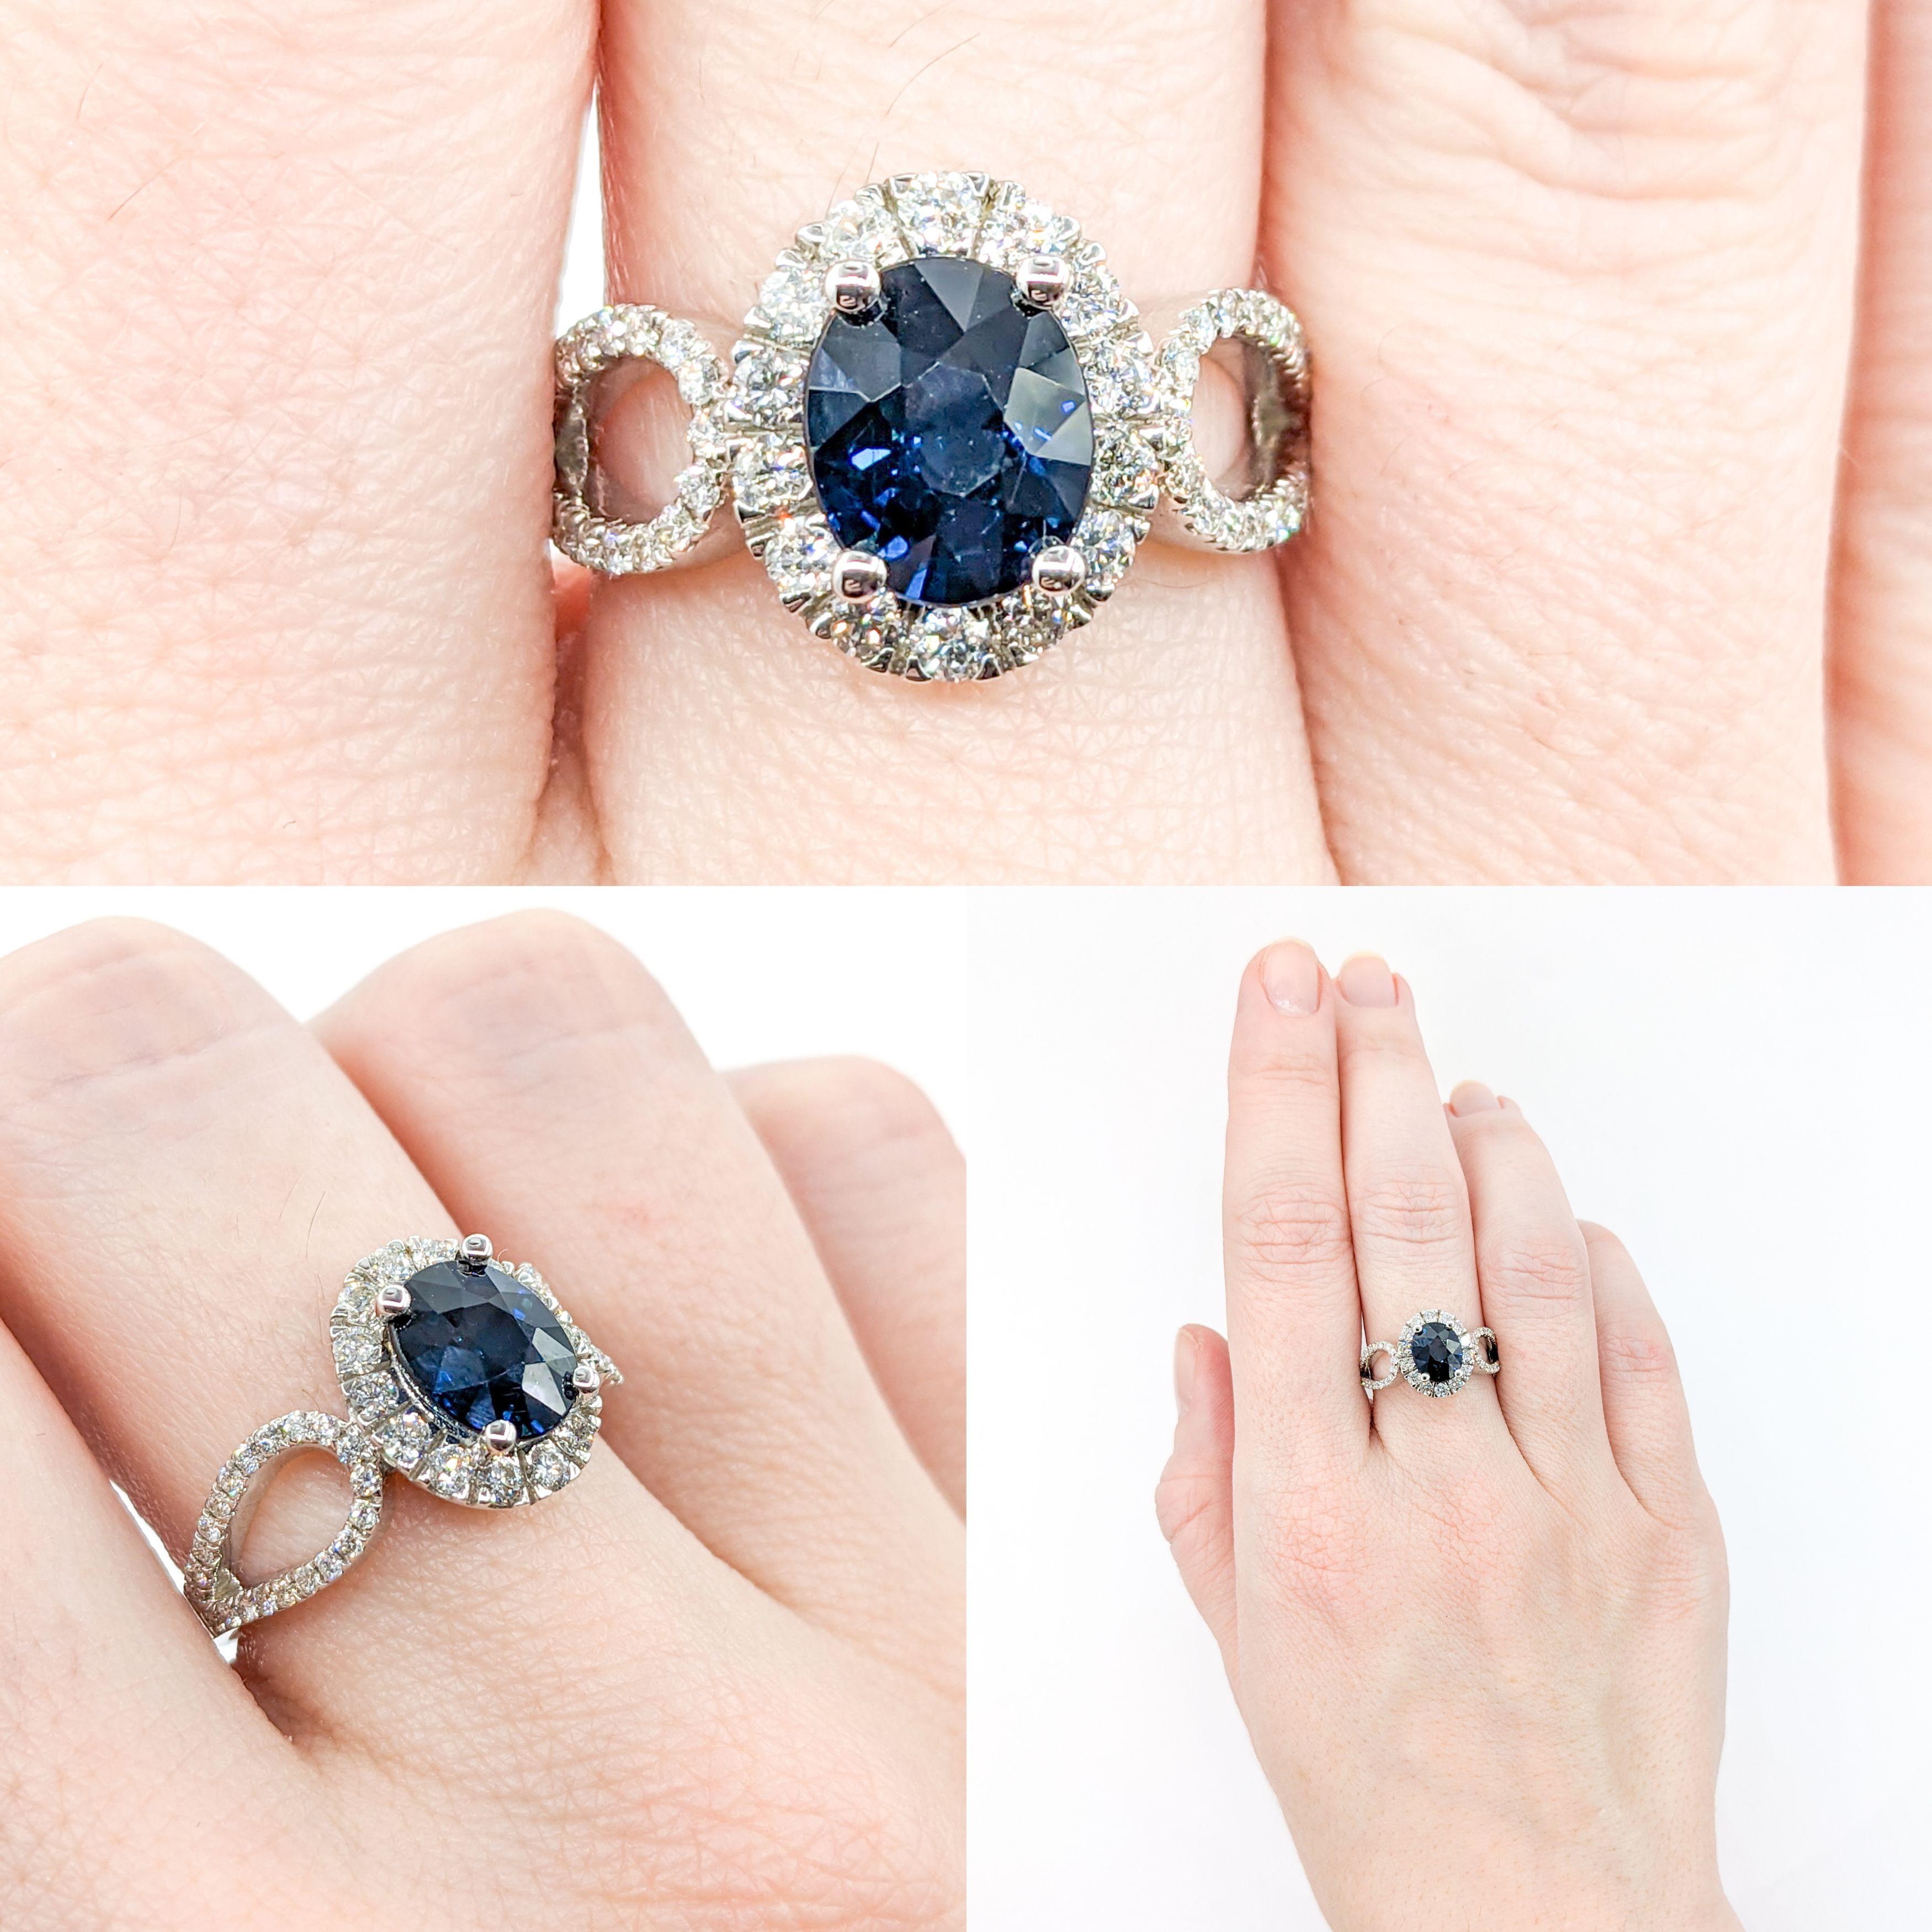 2.06ct Oval Blue Sapphire & Diamond Halo Ring In White Gold

Elevate your style with this gorgeous Sapphire ring, finely crafted in bright 14k White Gold. The design features a captivating 2.06ct Sapphire, adding a luxurious touch of deep blue